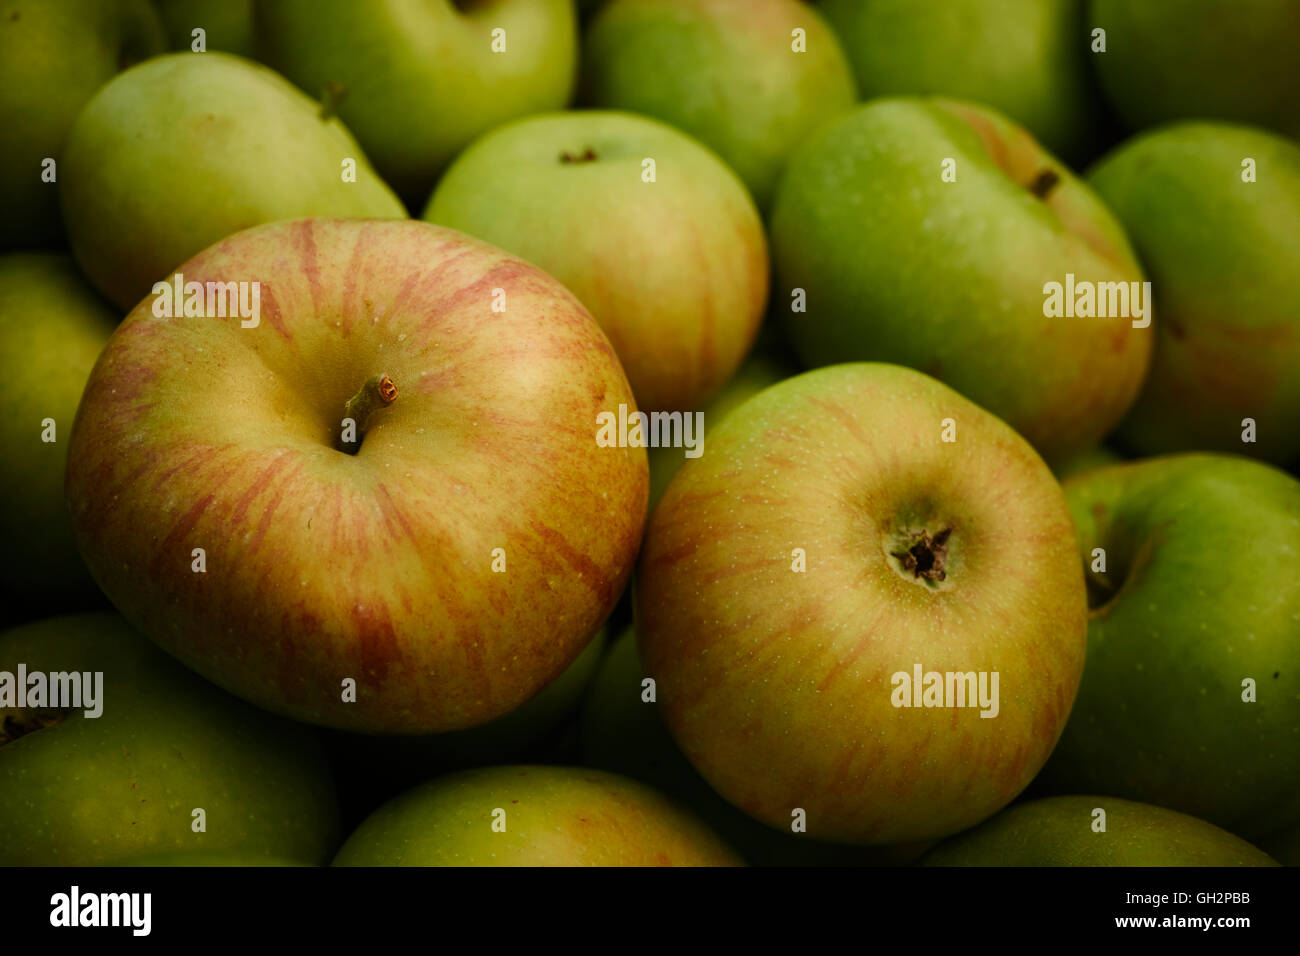 A bin of ripe apples at a farmer's market in Amish Country, Lancaster County, Pennsylvania, USA Stock Photo